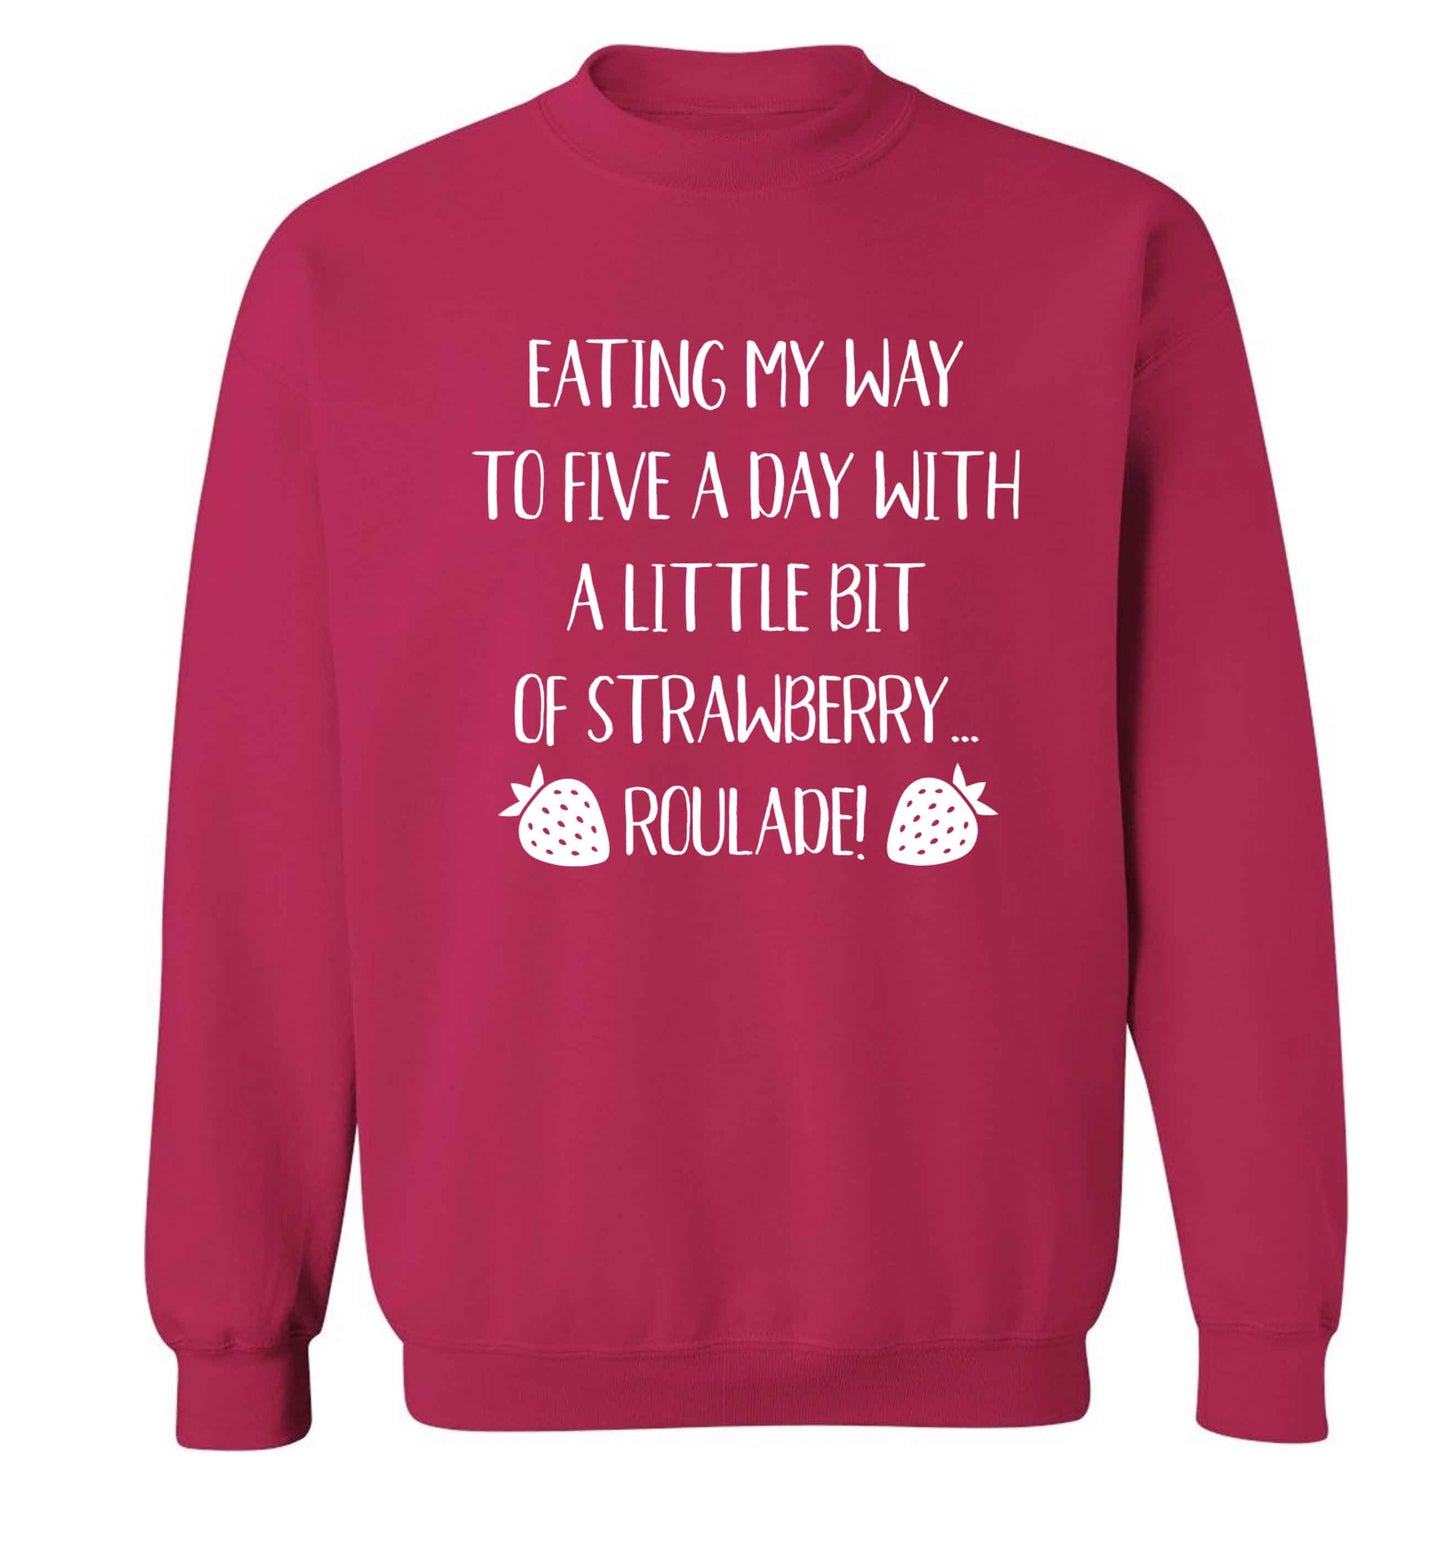 Eating my way to five a day with a little bit of strawberry roulade Adult's unisex pink Sweater 2XL